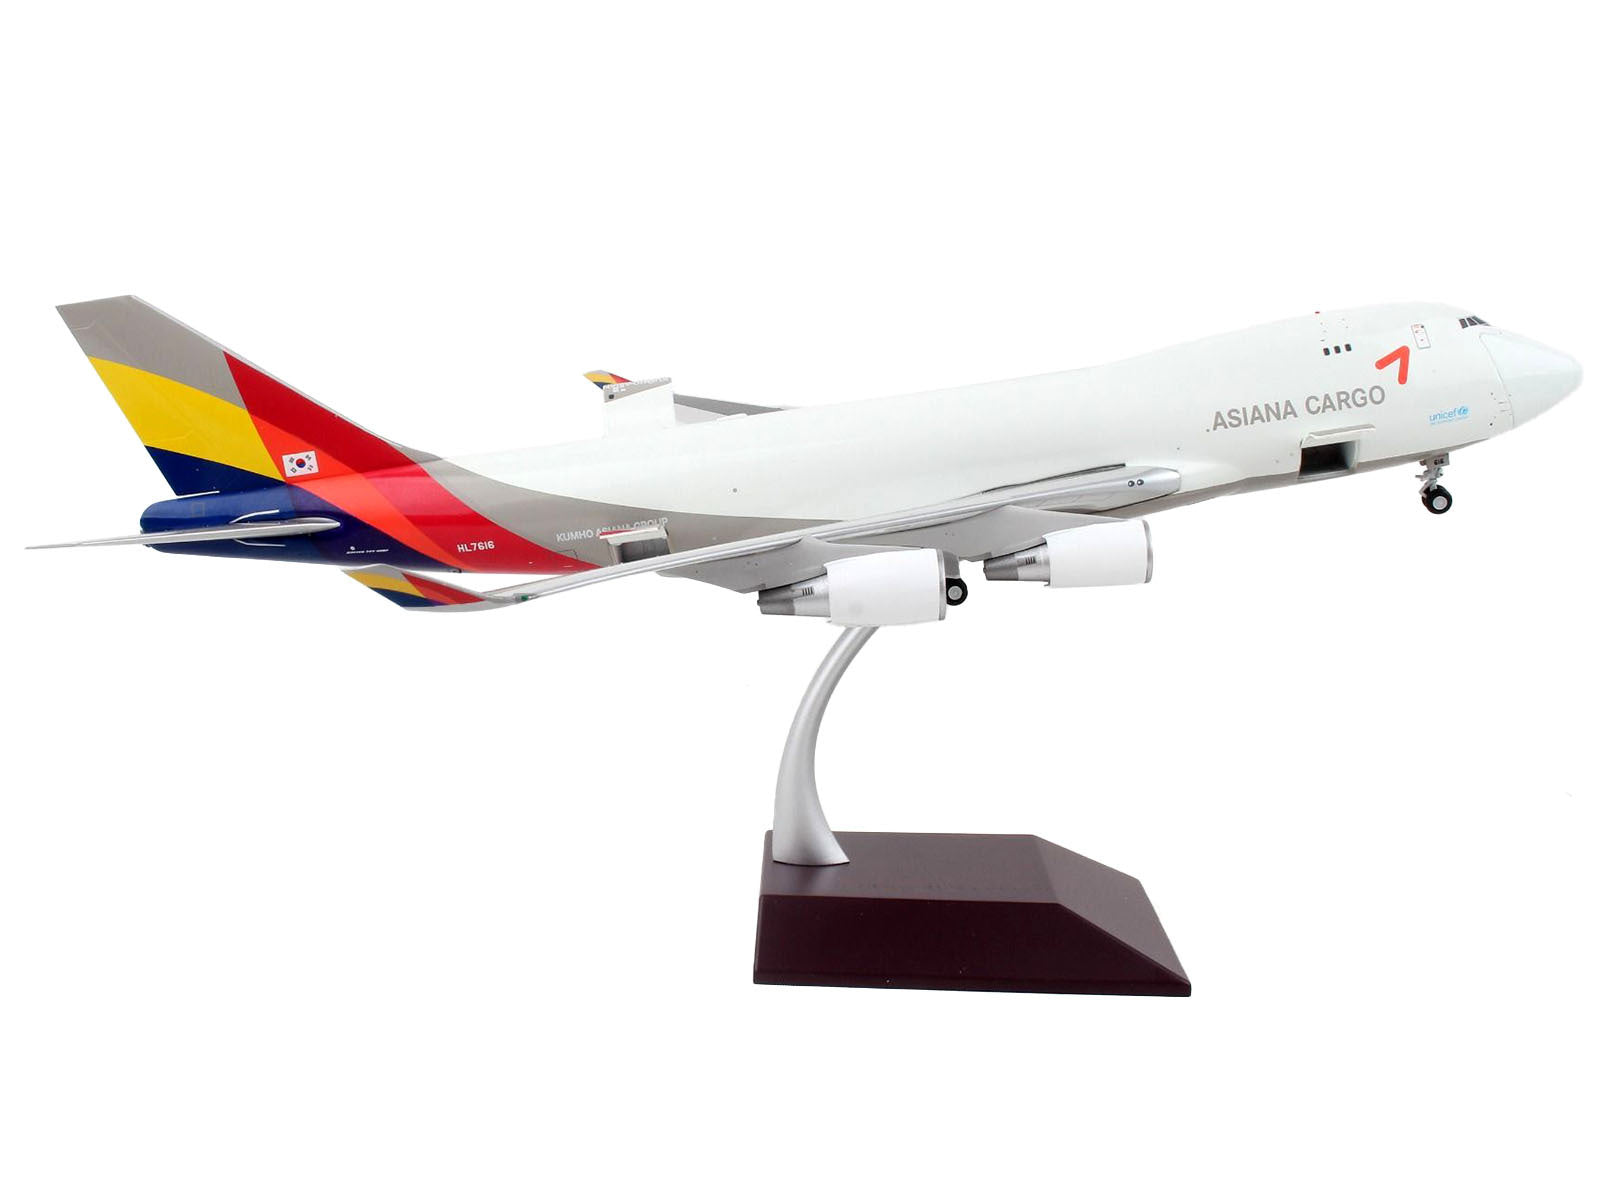 Boeing 747-400F Commercial Aircraft "Asiana Cargo" White with Striped Tail